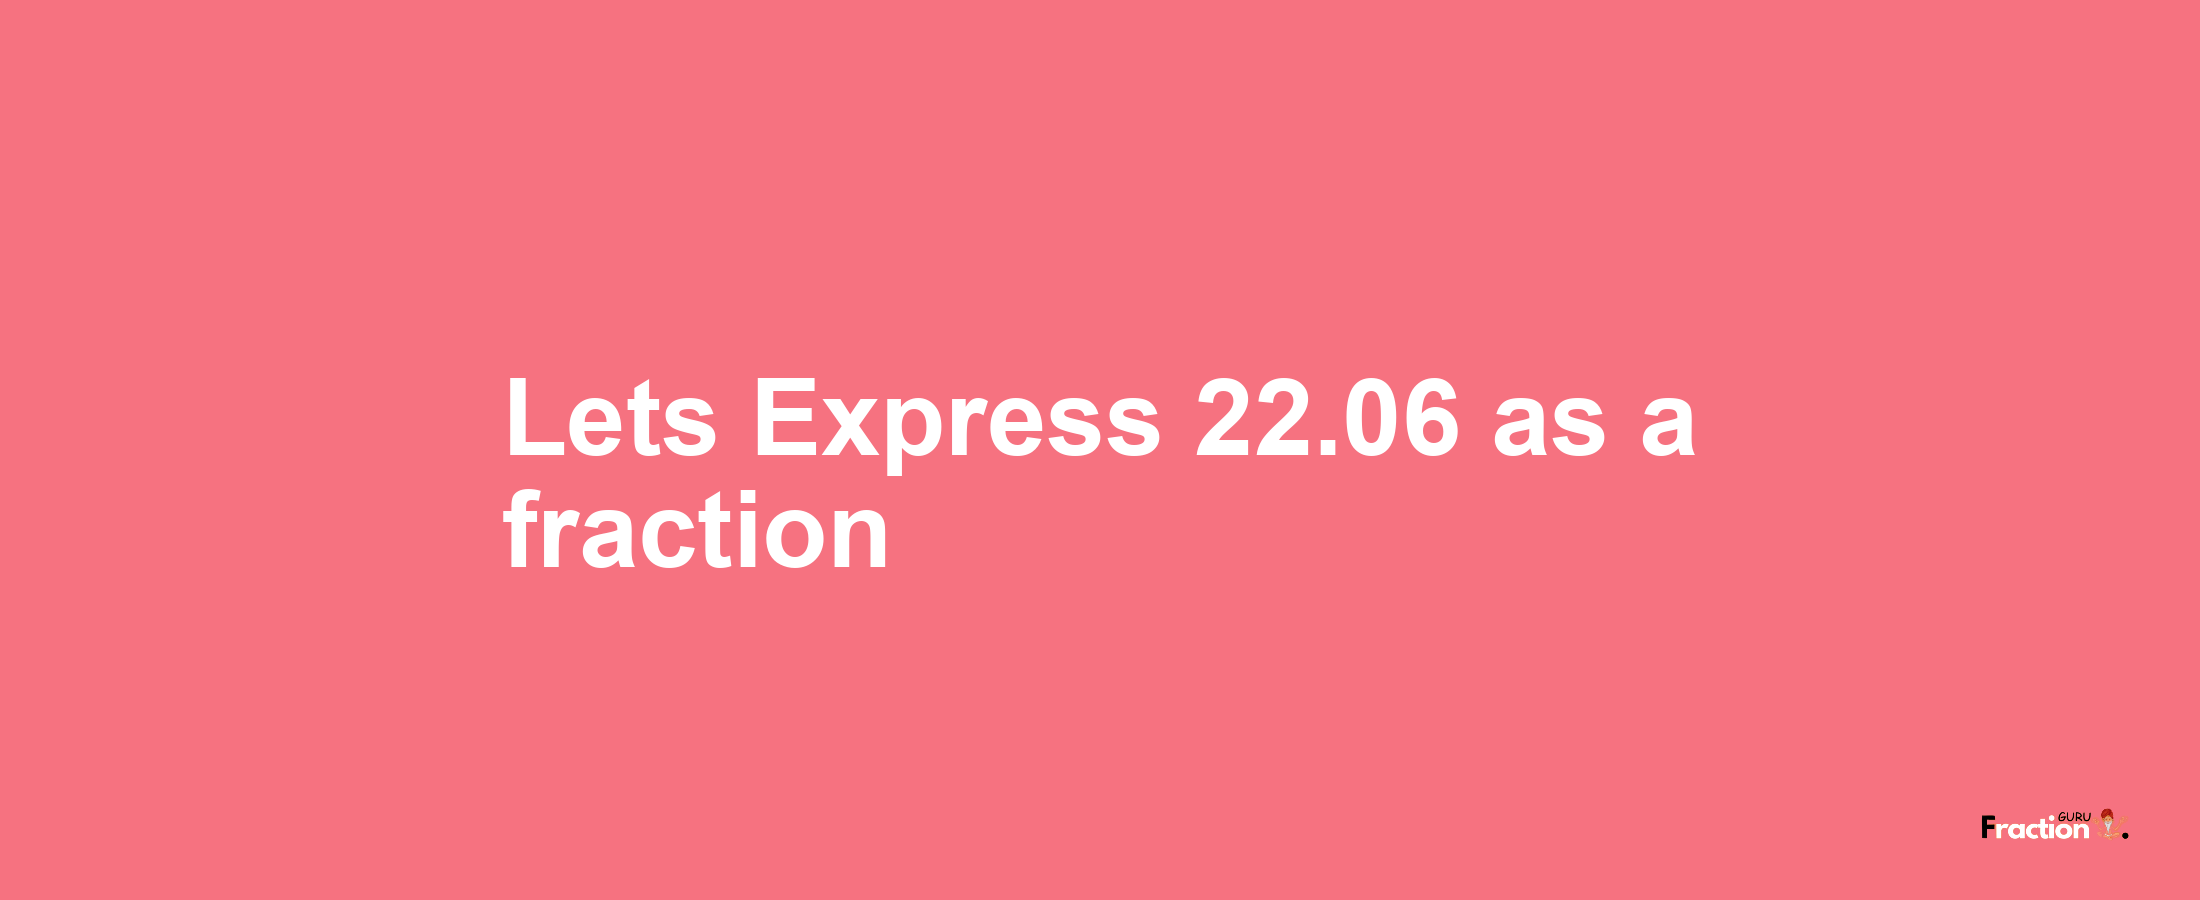 Lets Express 22.06 as afraction